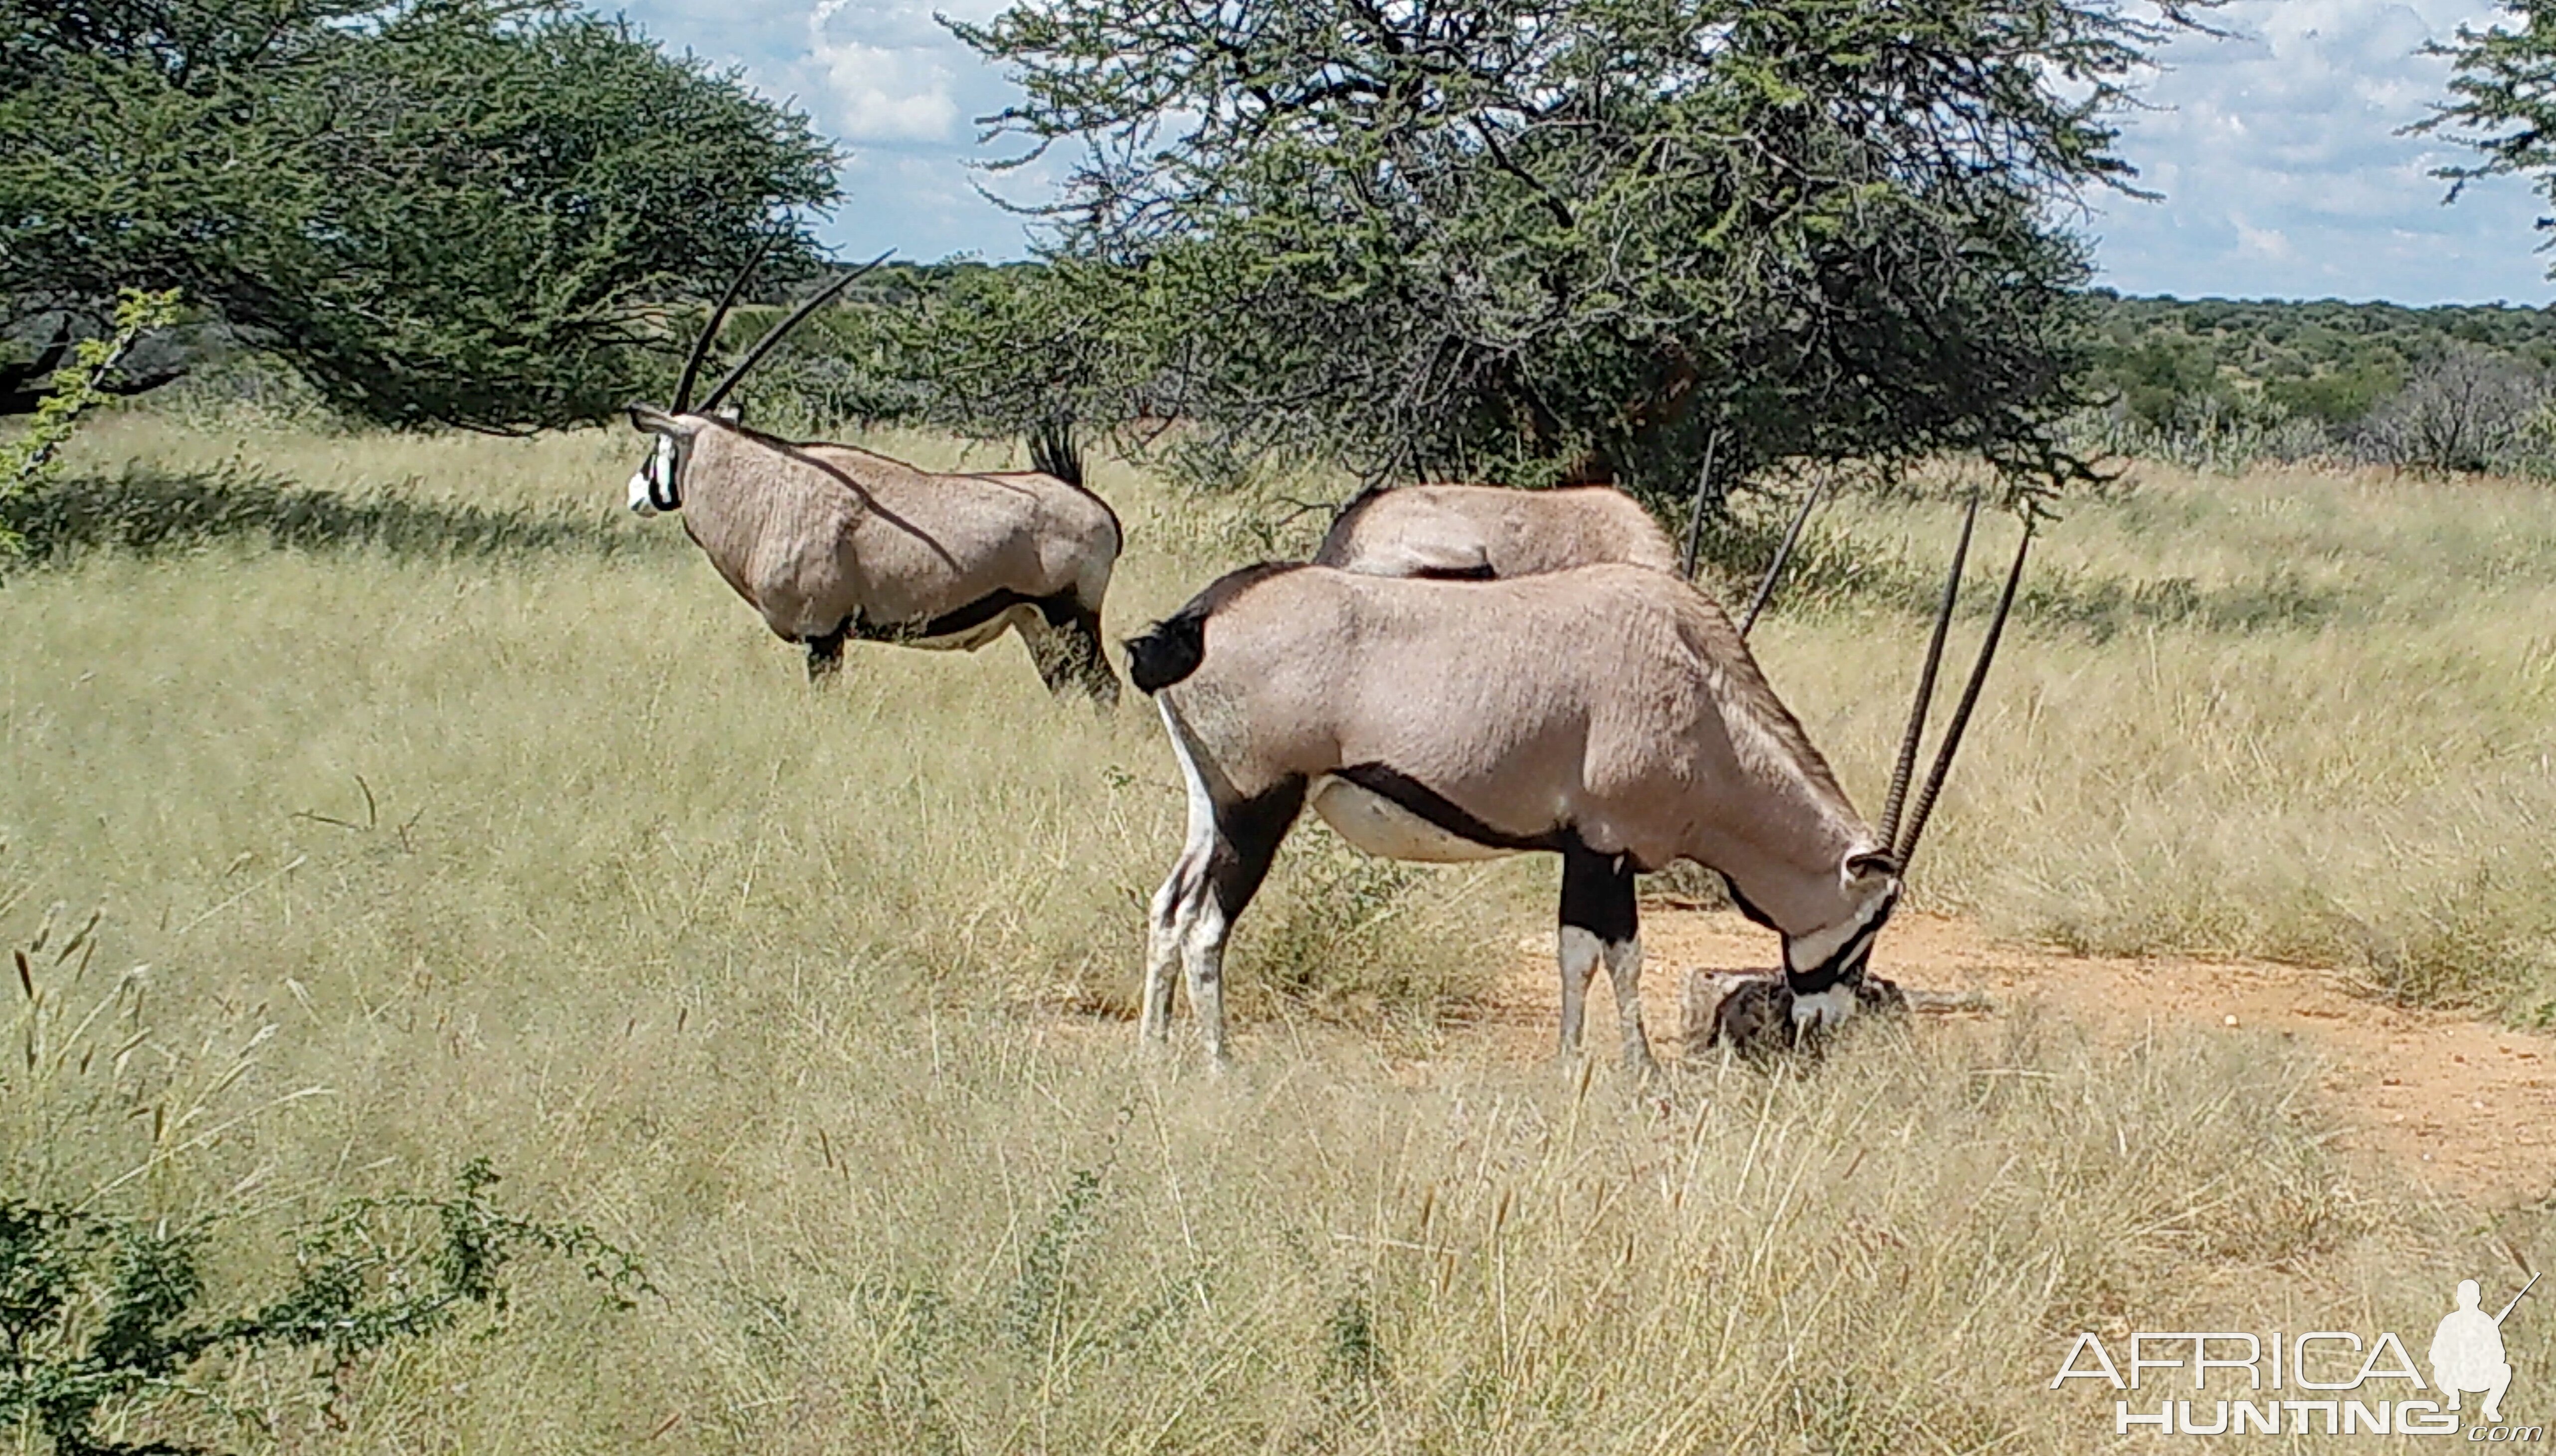 Some heavy oryx starting to show